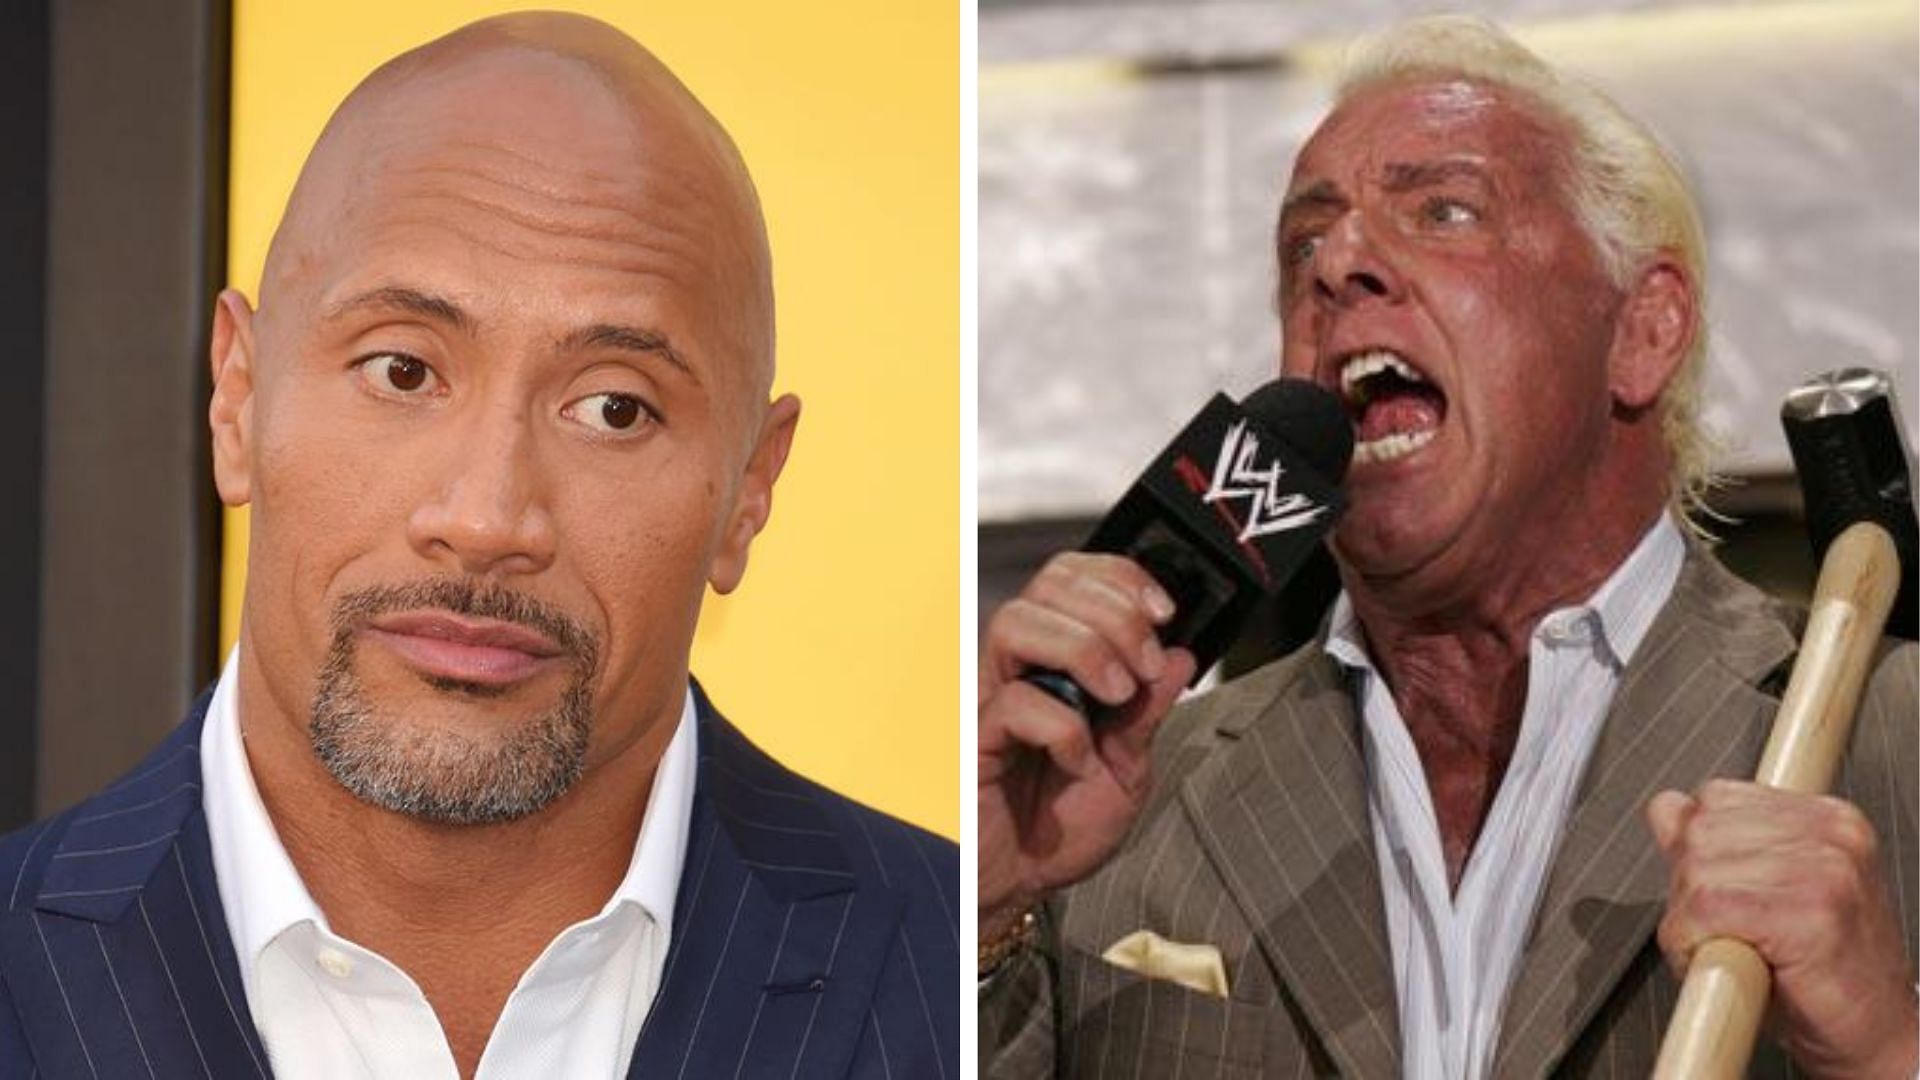 The Rock on the left, Ric Flair on the right